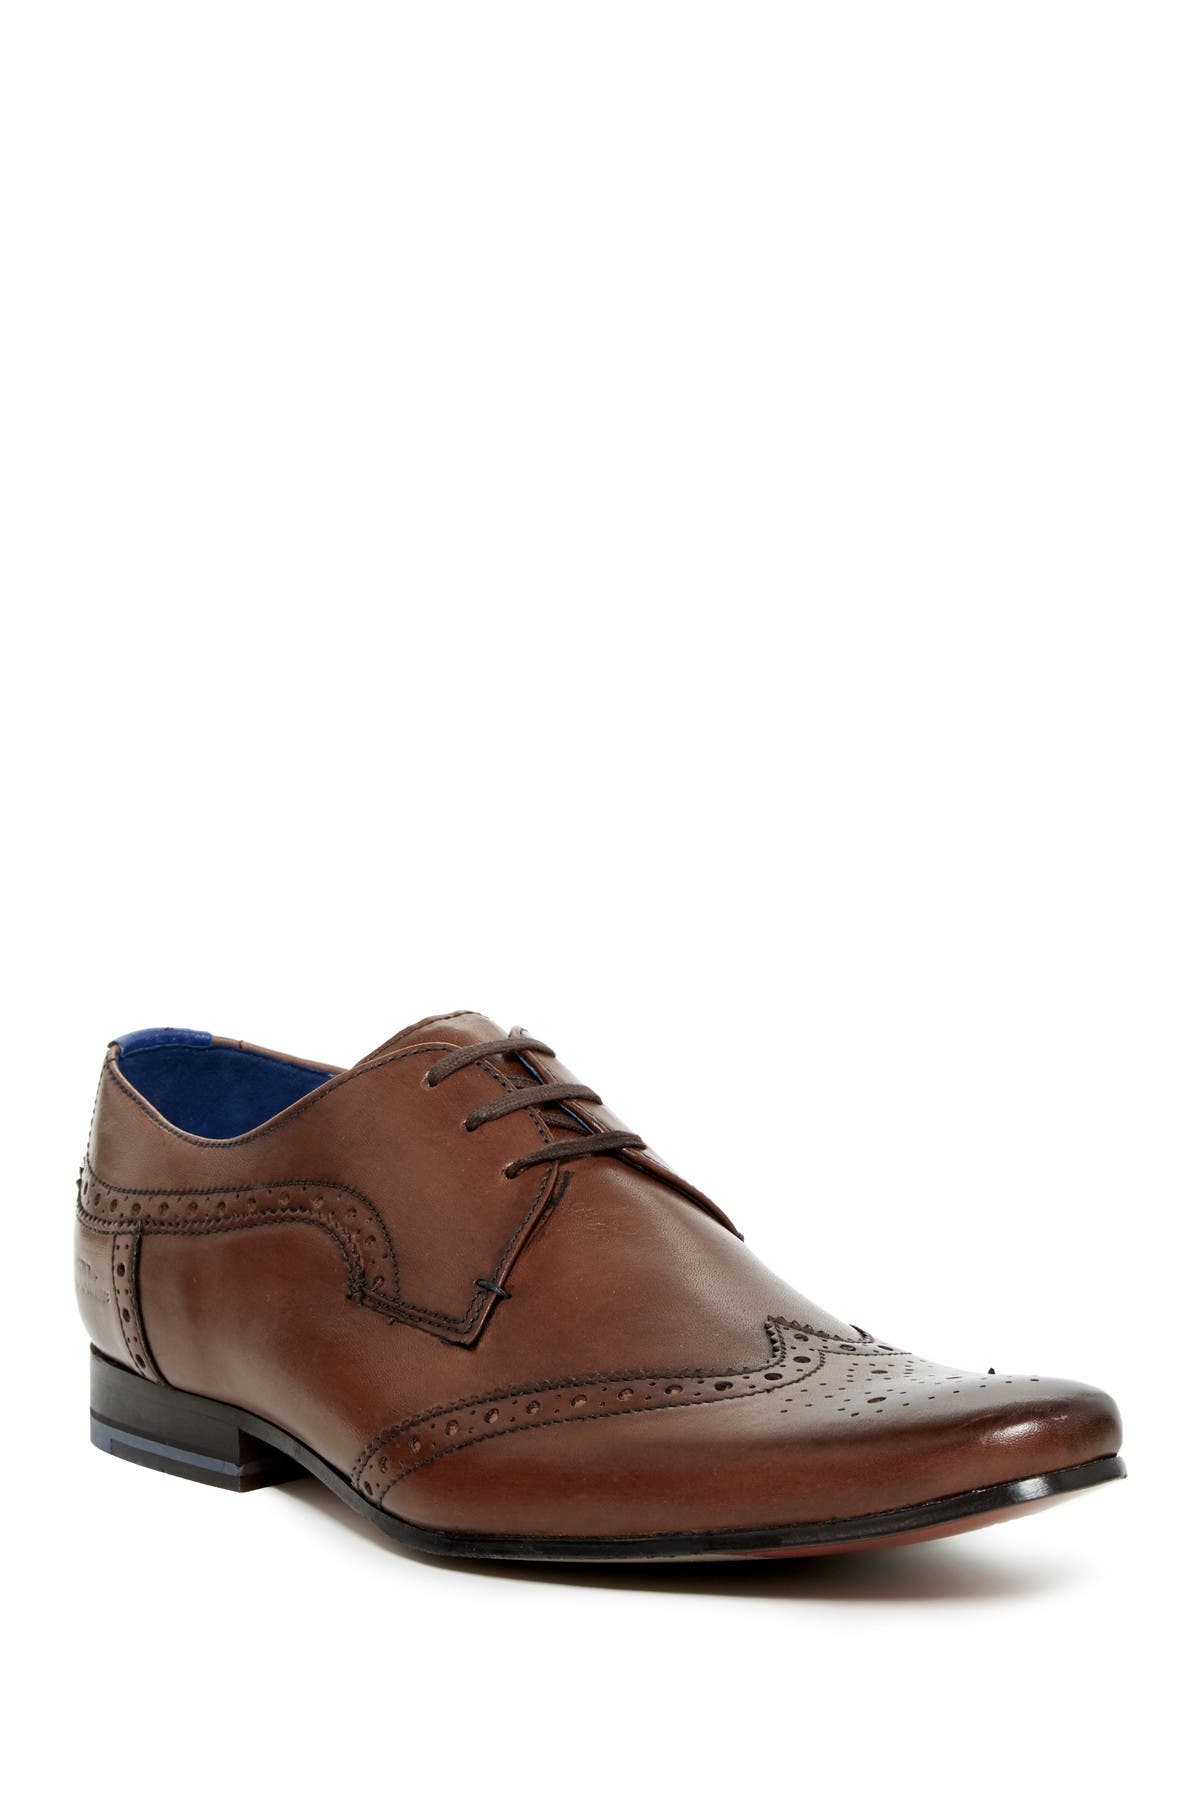 ted baker oxford shoes